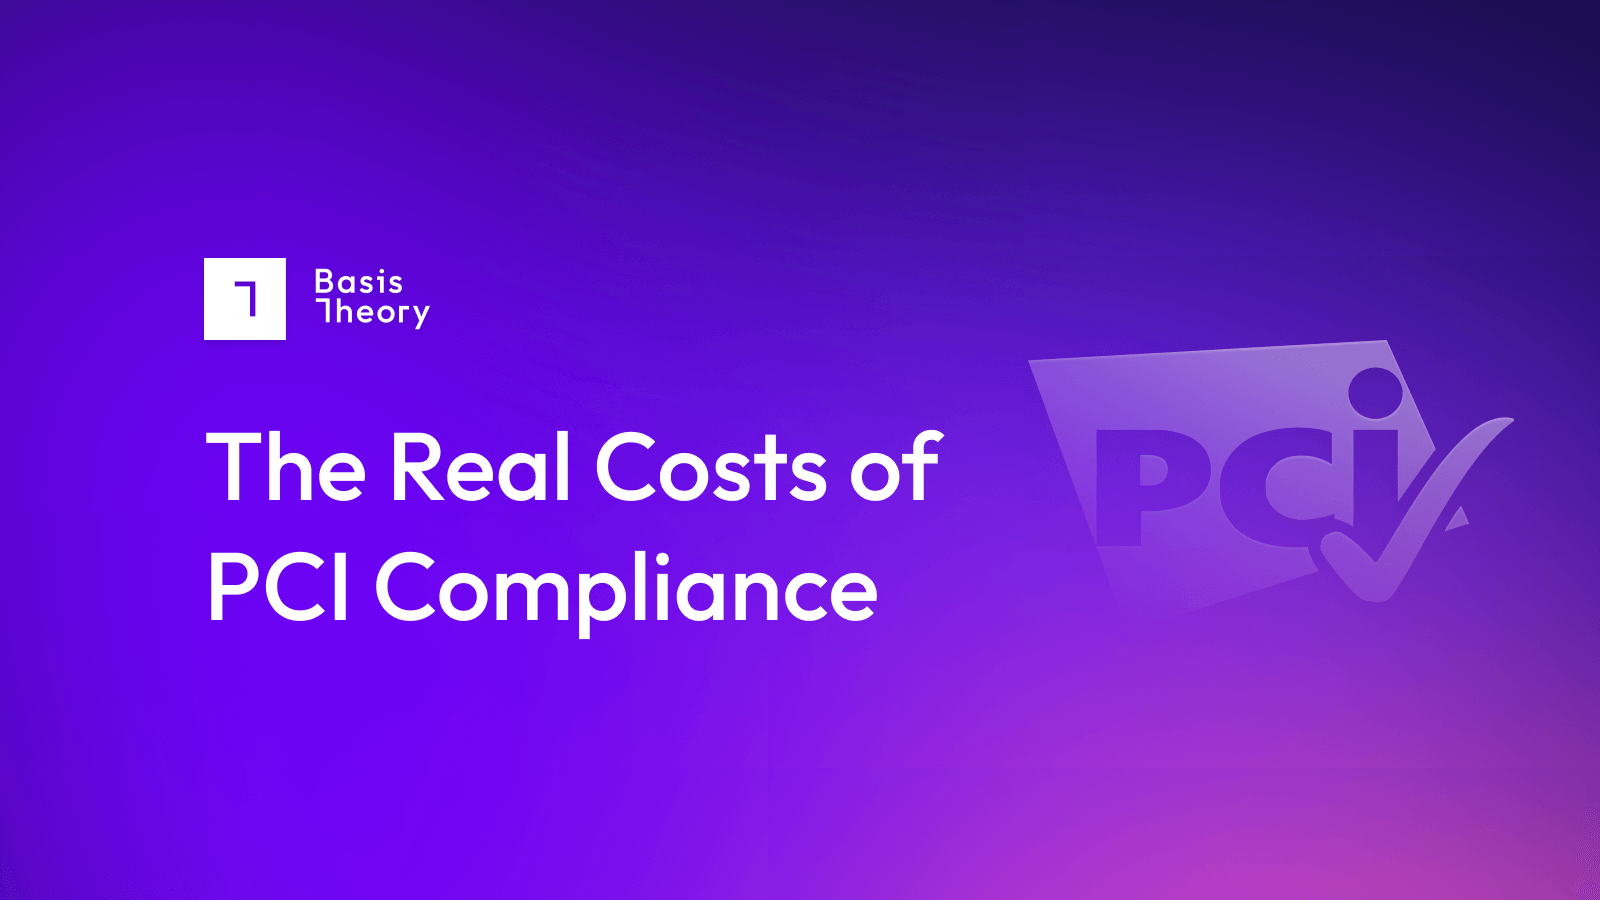 The Real costs of PCI Compliance